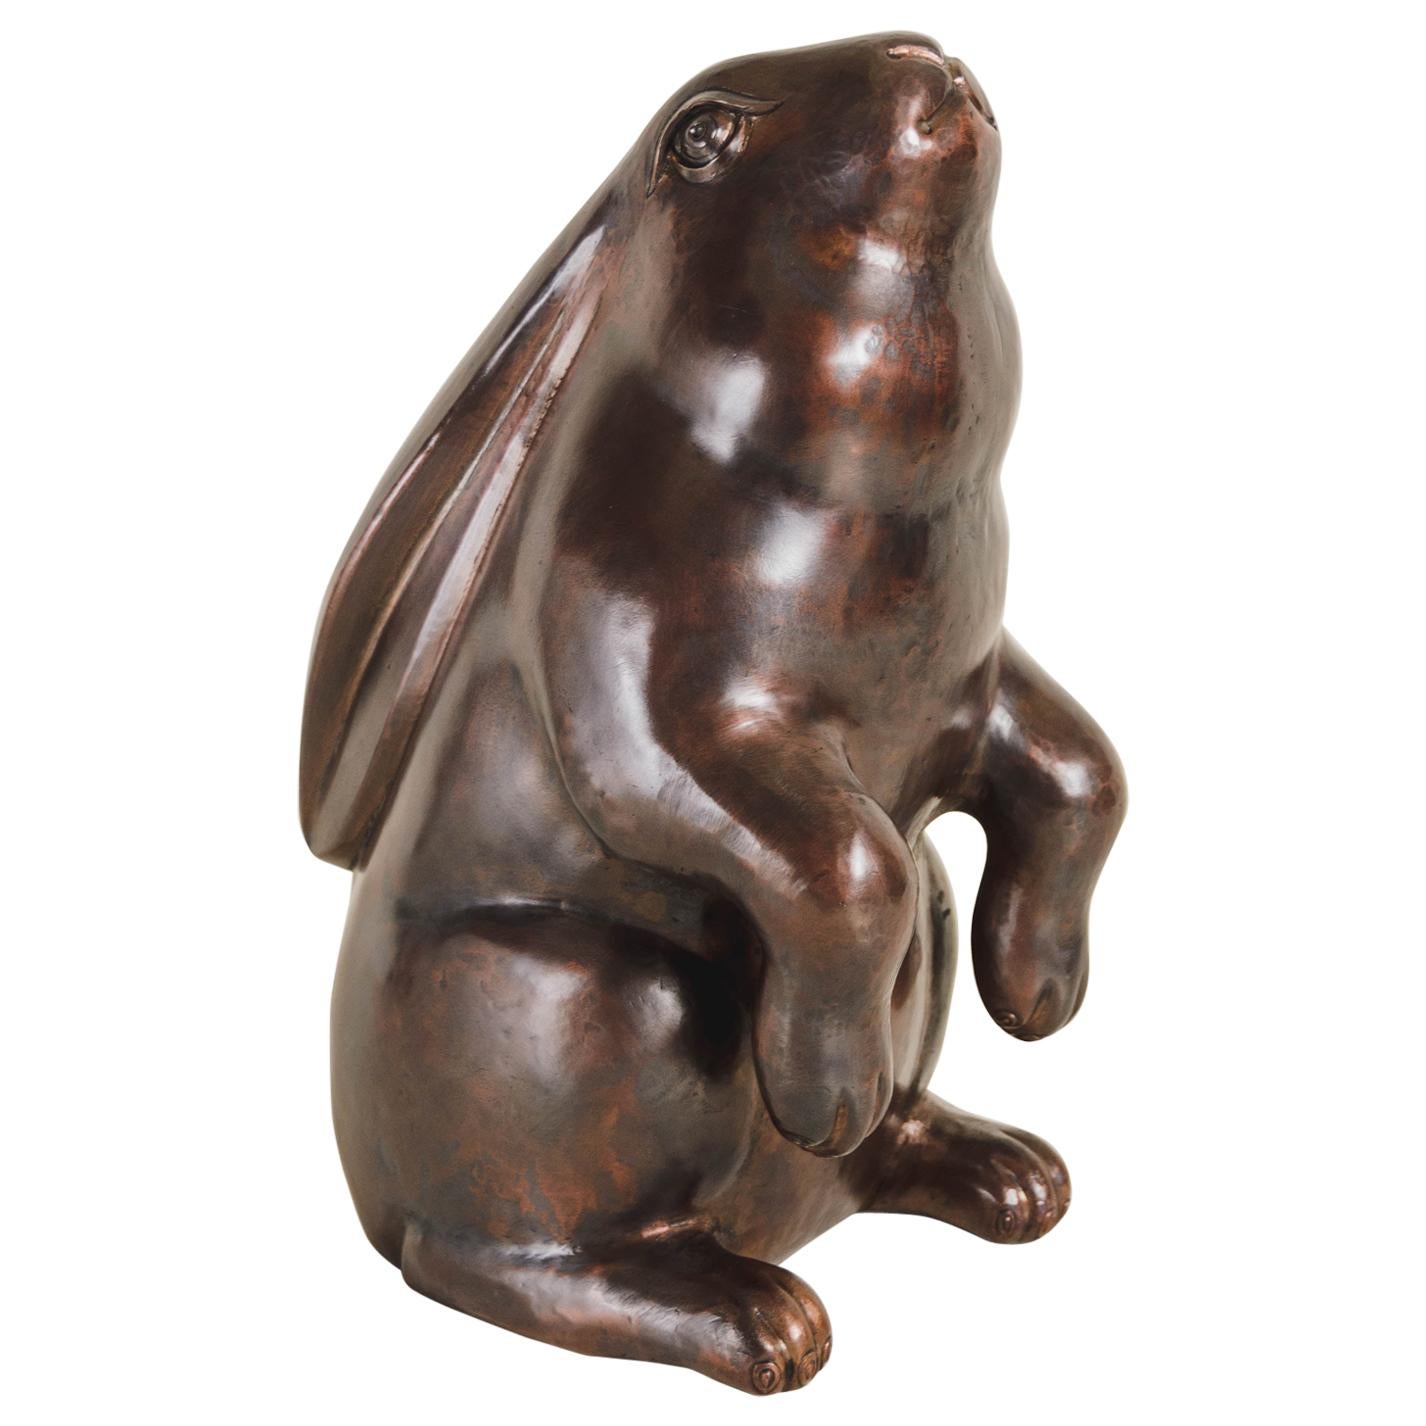 Contemporary Sitting Rabbit Sculpture in Antique Copper by Robert Kuo